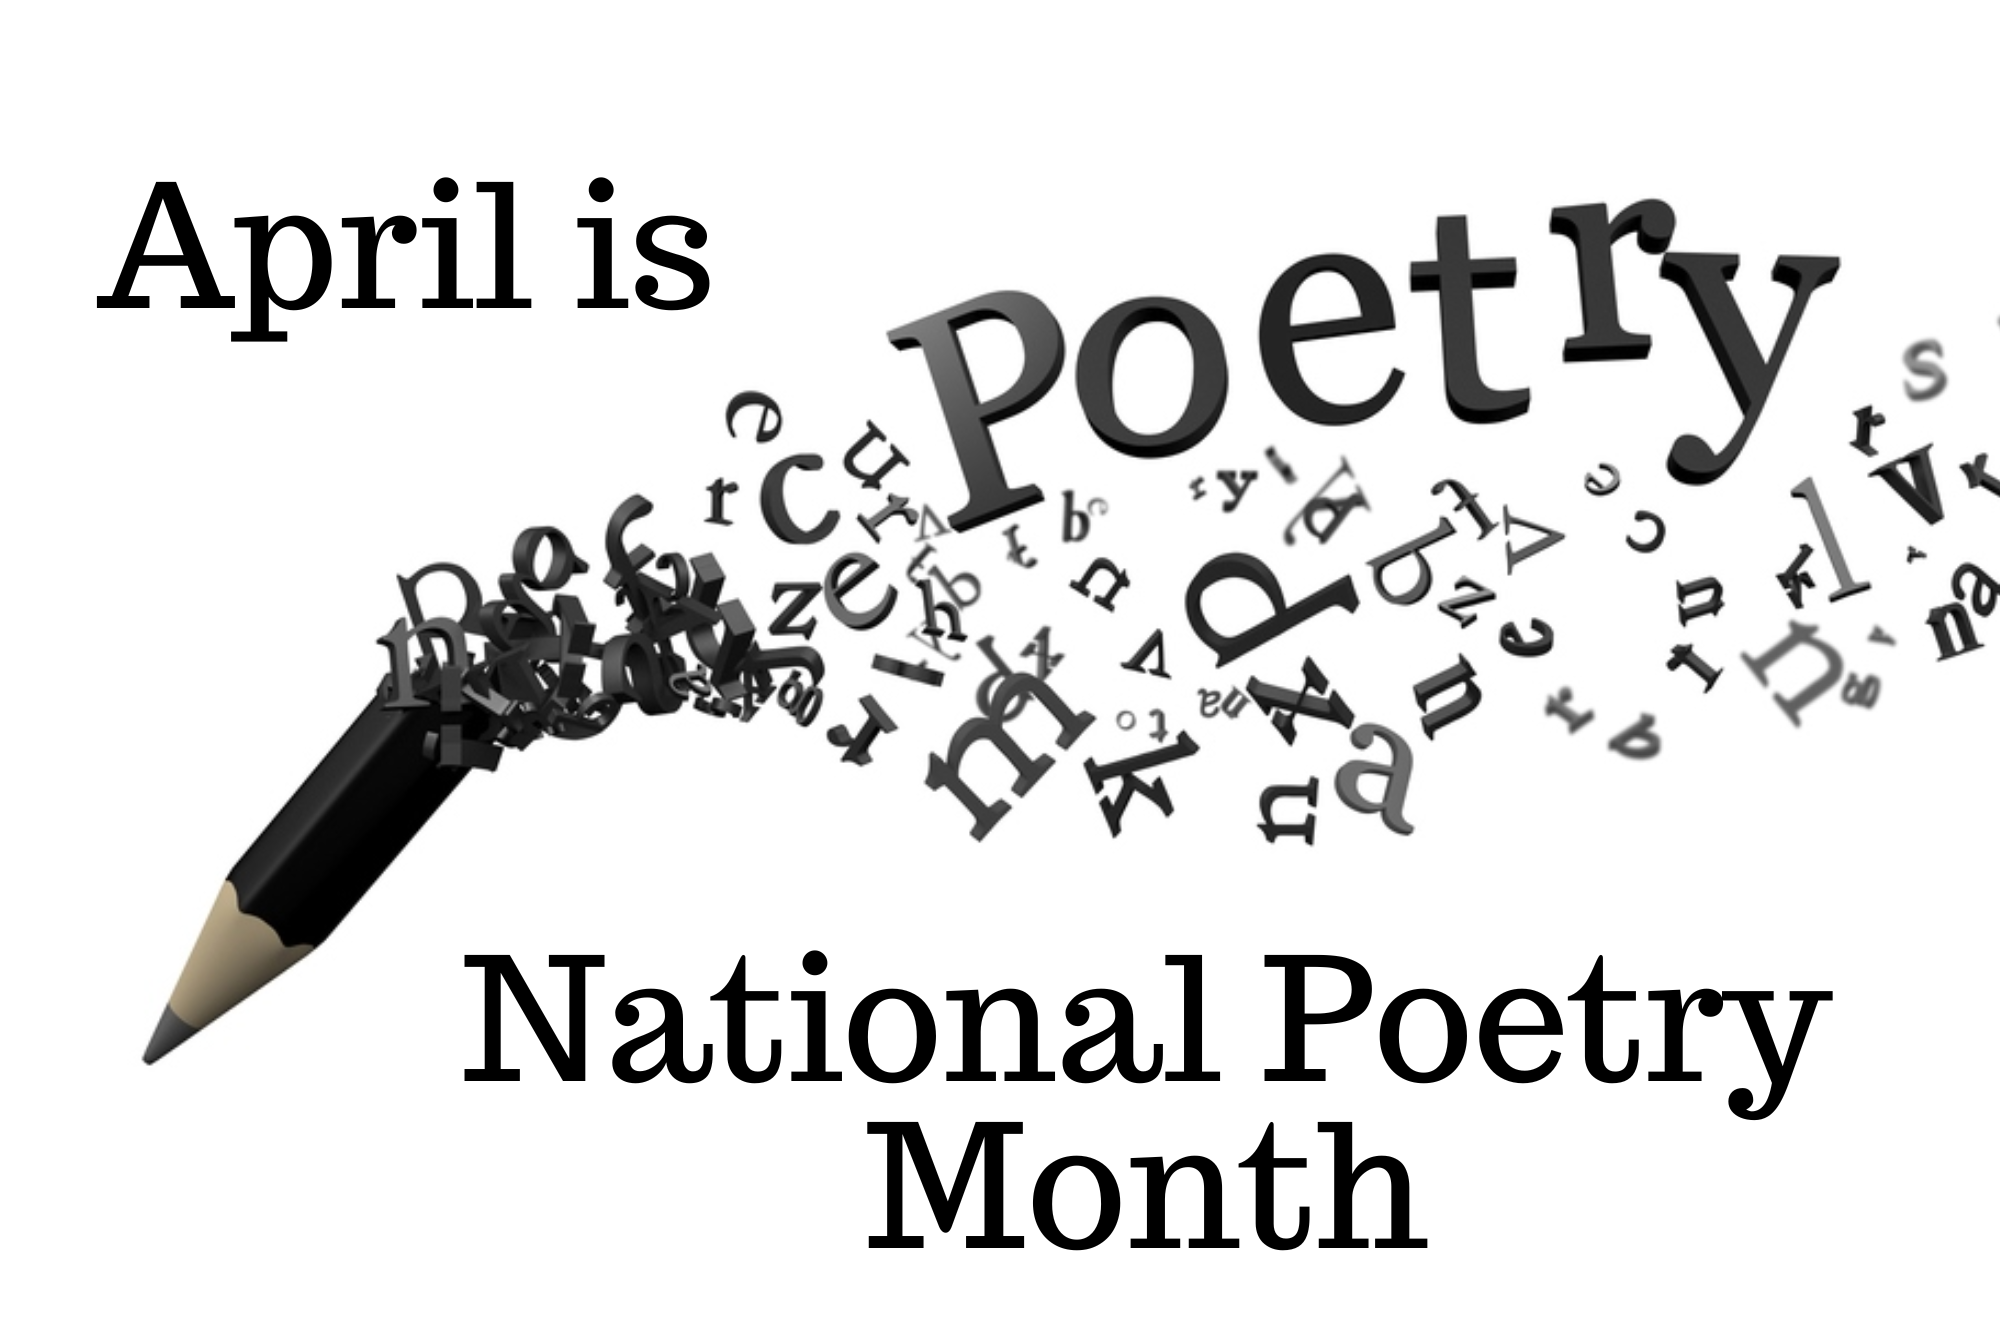 April is National Poetry Month Charles County Public Library